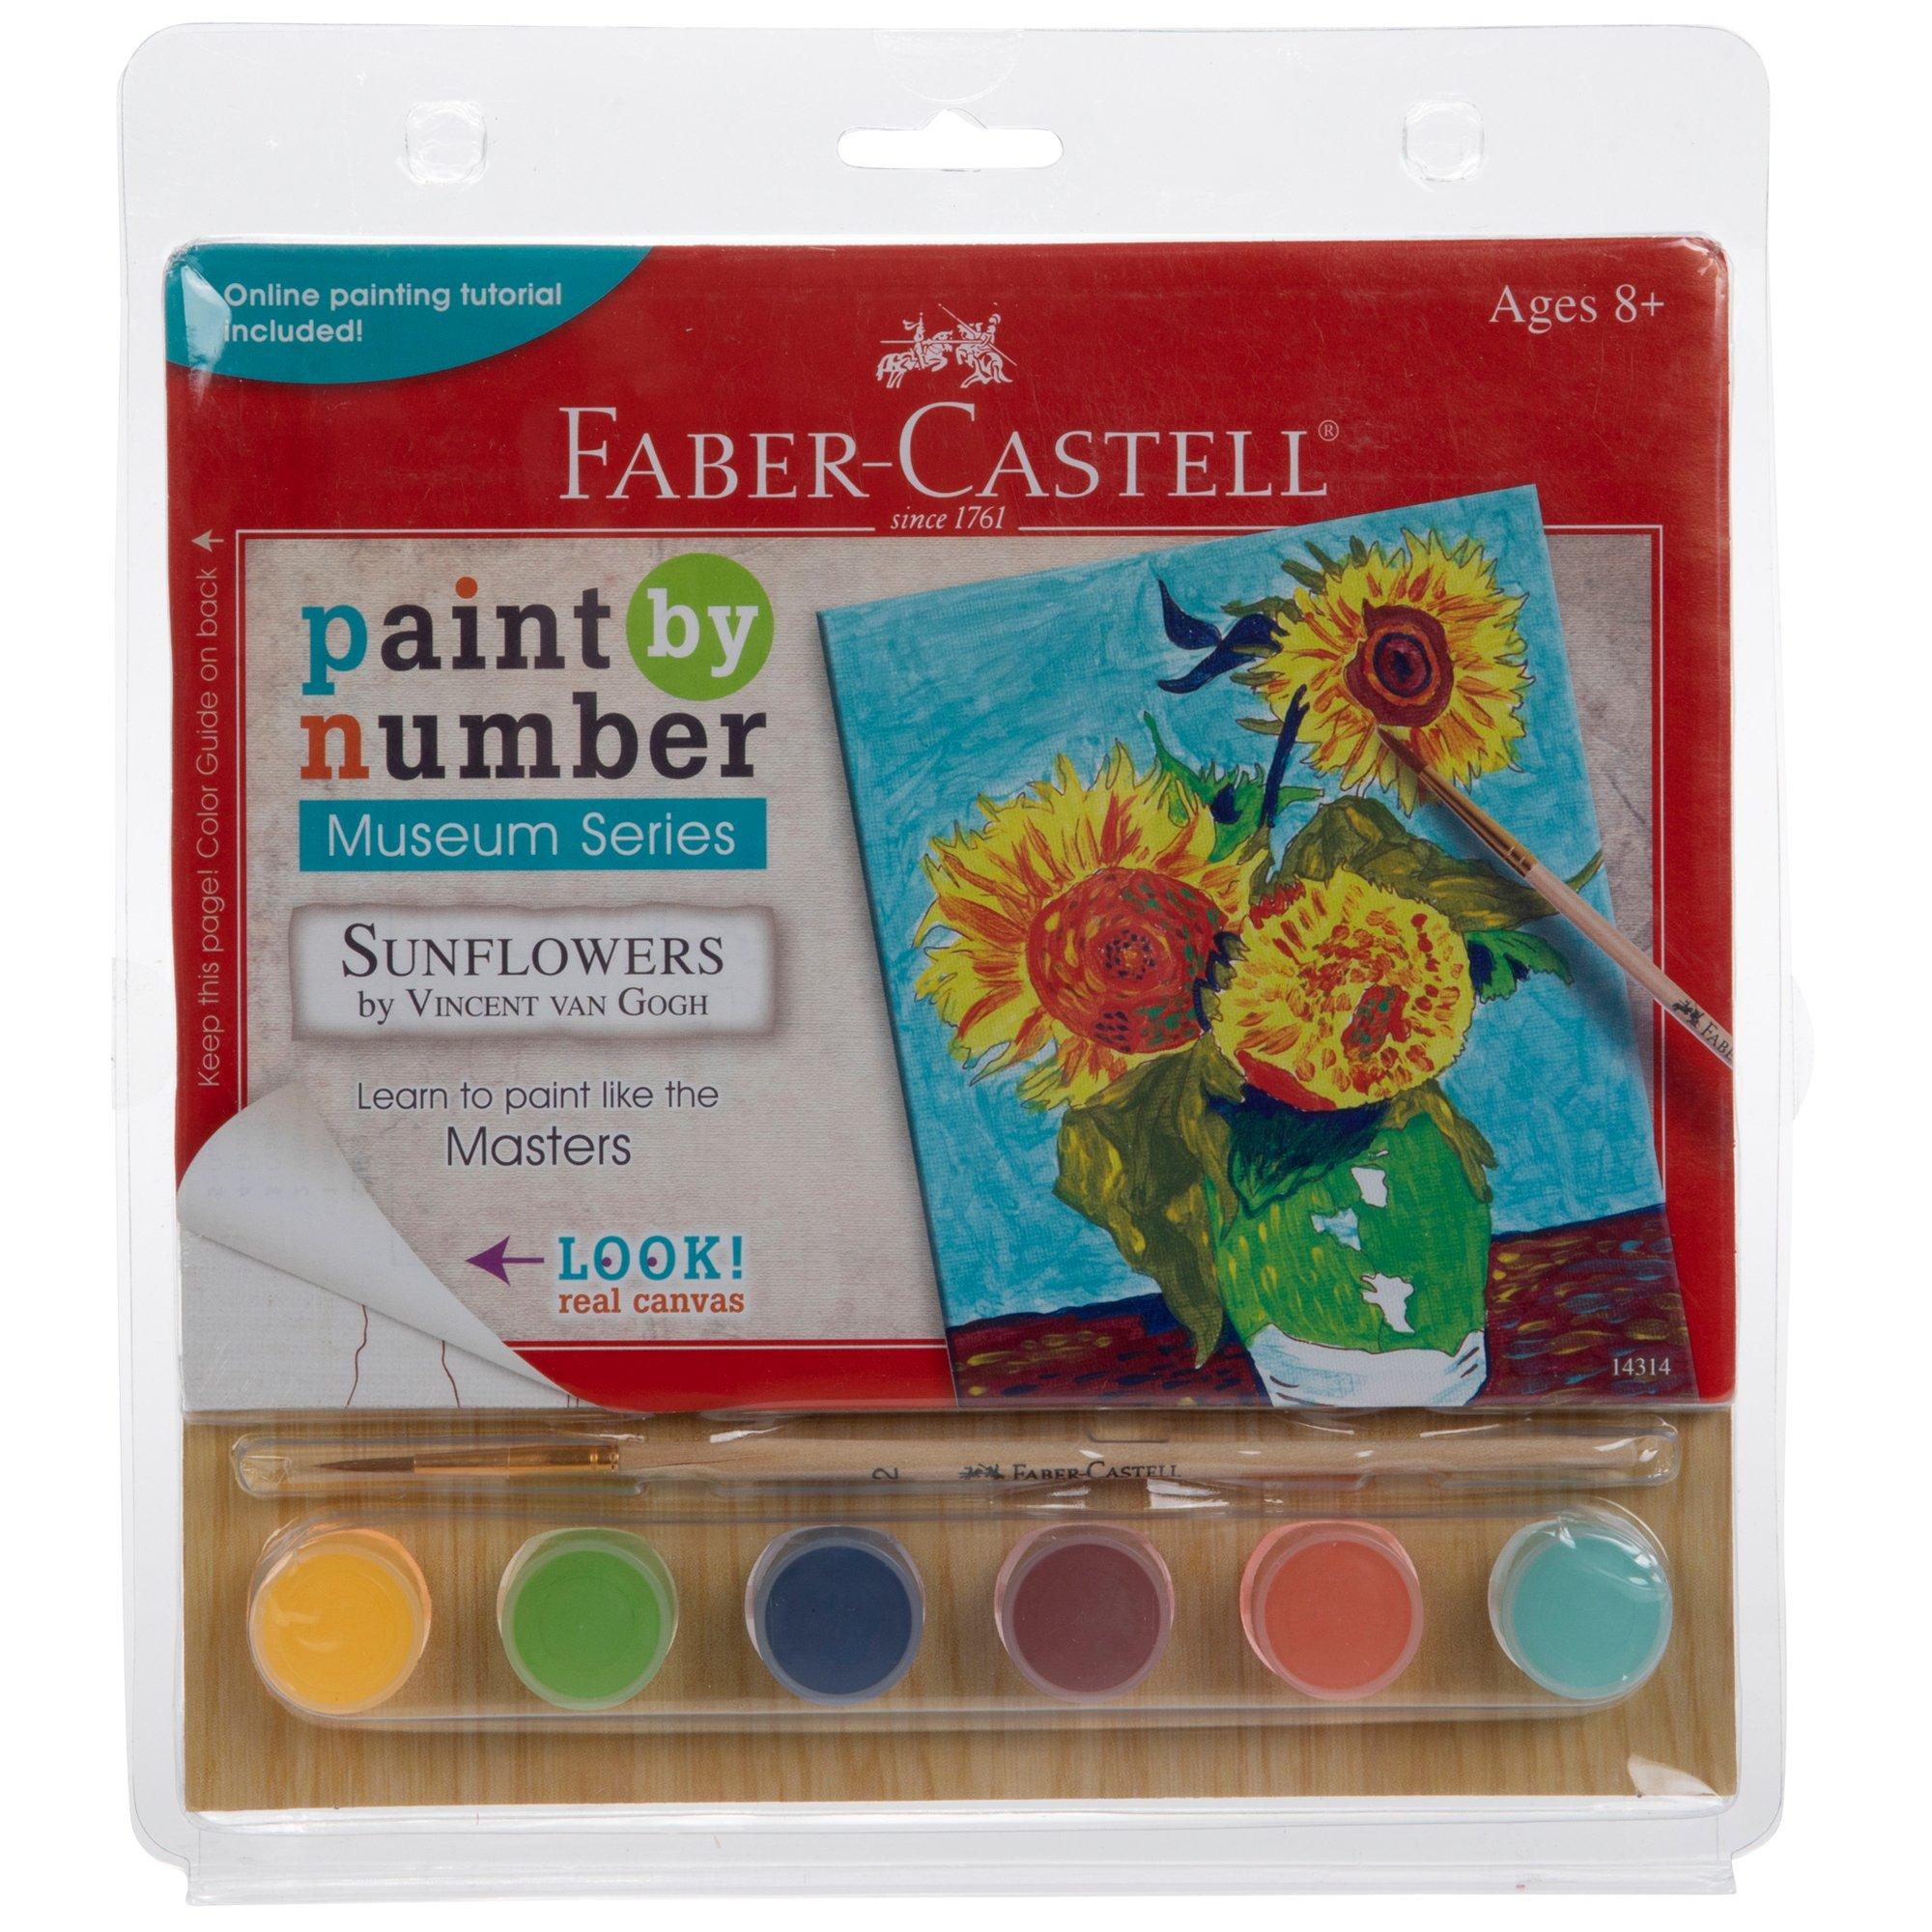 Faber-Castell Paint by Number Museum Series - Water Lilies